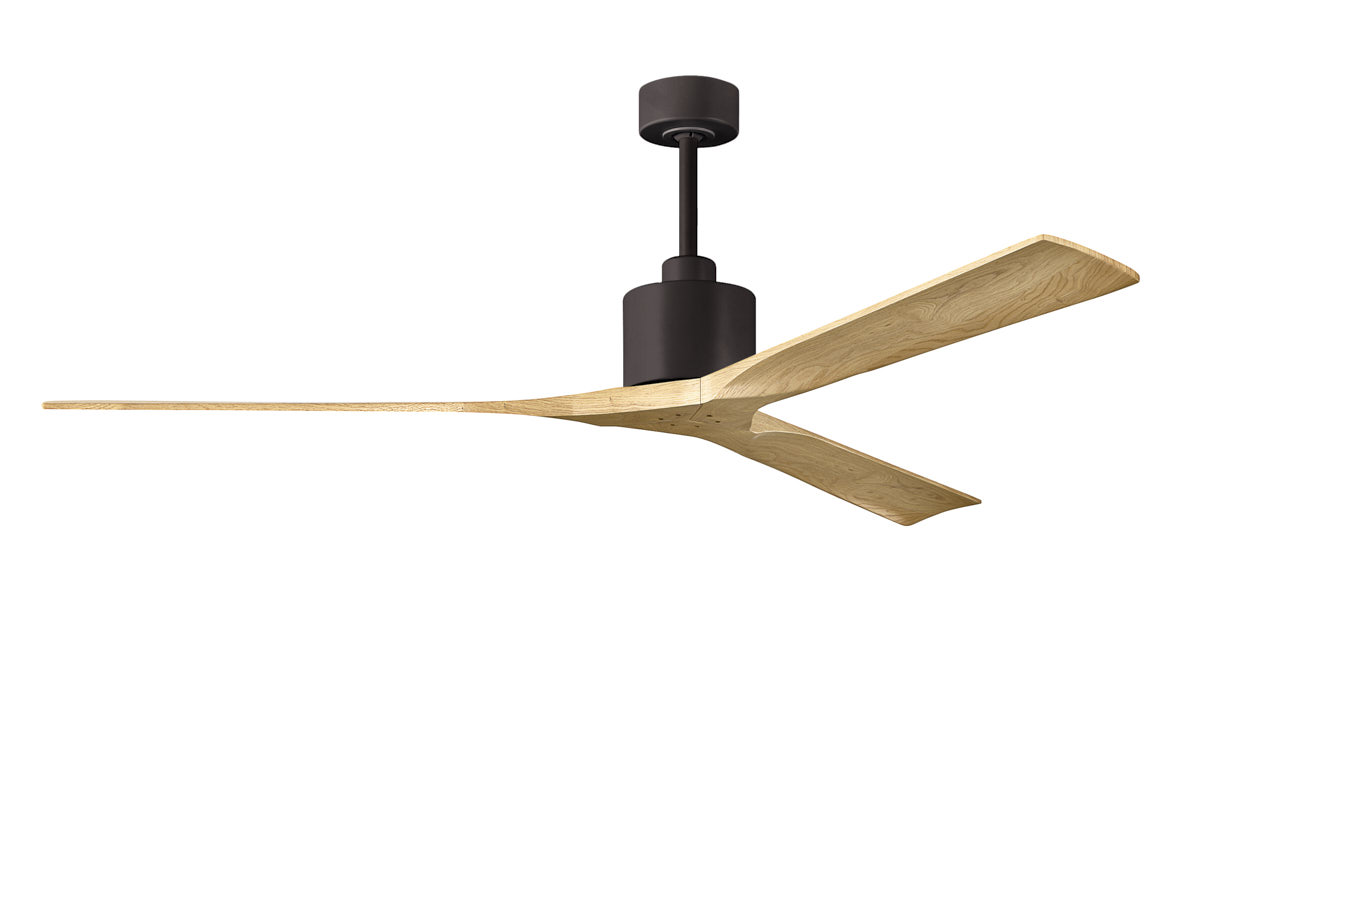 Nan XL ceiling fan in Textured Bronze with 72” Light Maple blades